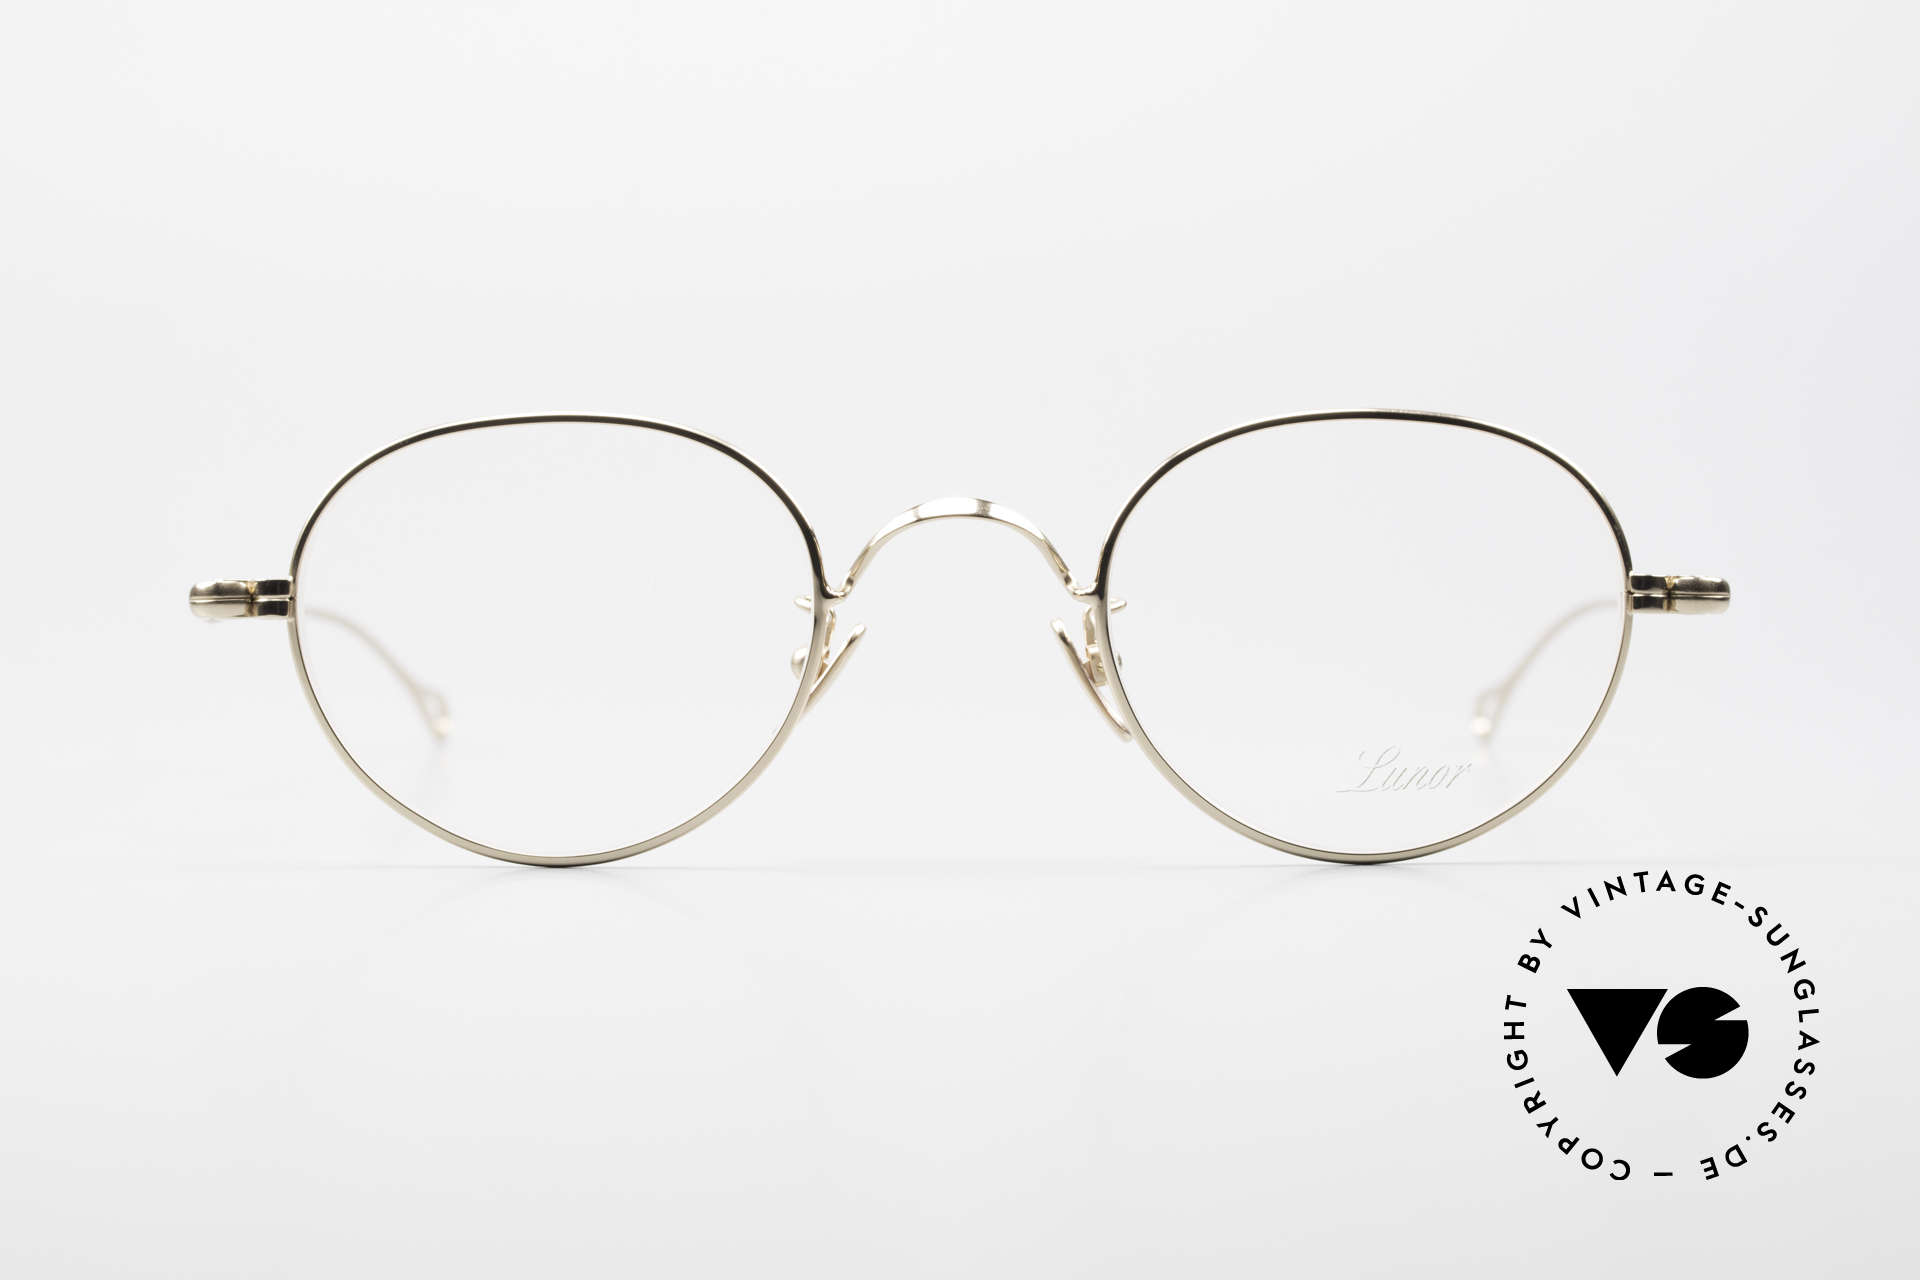 Lunor V 108 Gold Plated Glasses Titanium, without ostentatious logos (but in a timeless elegance), Made for Men